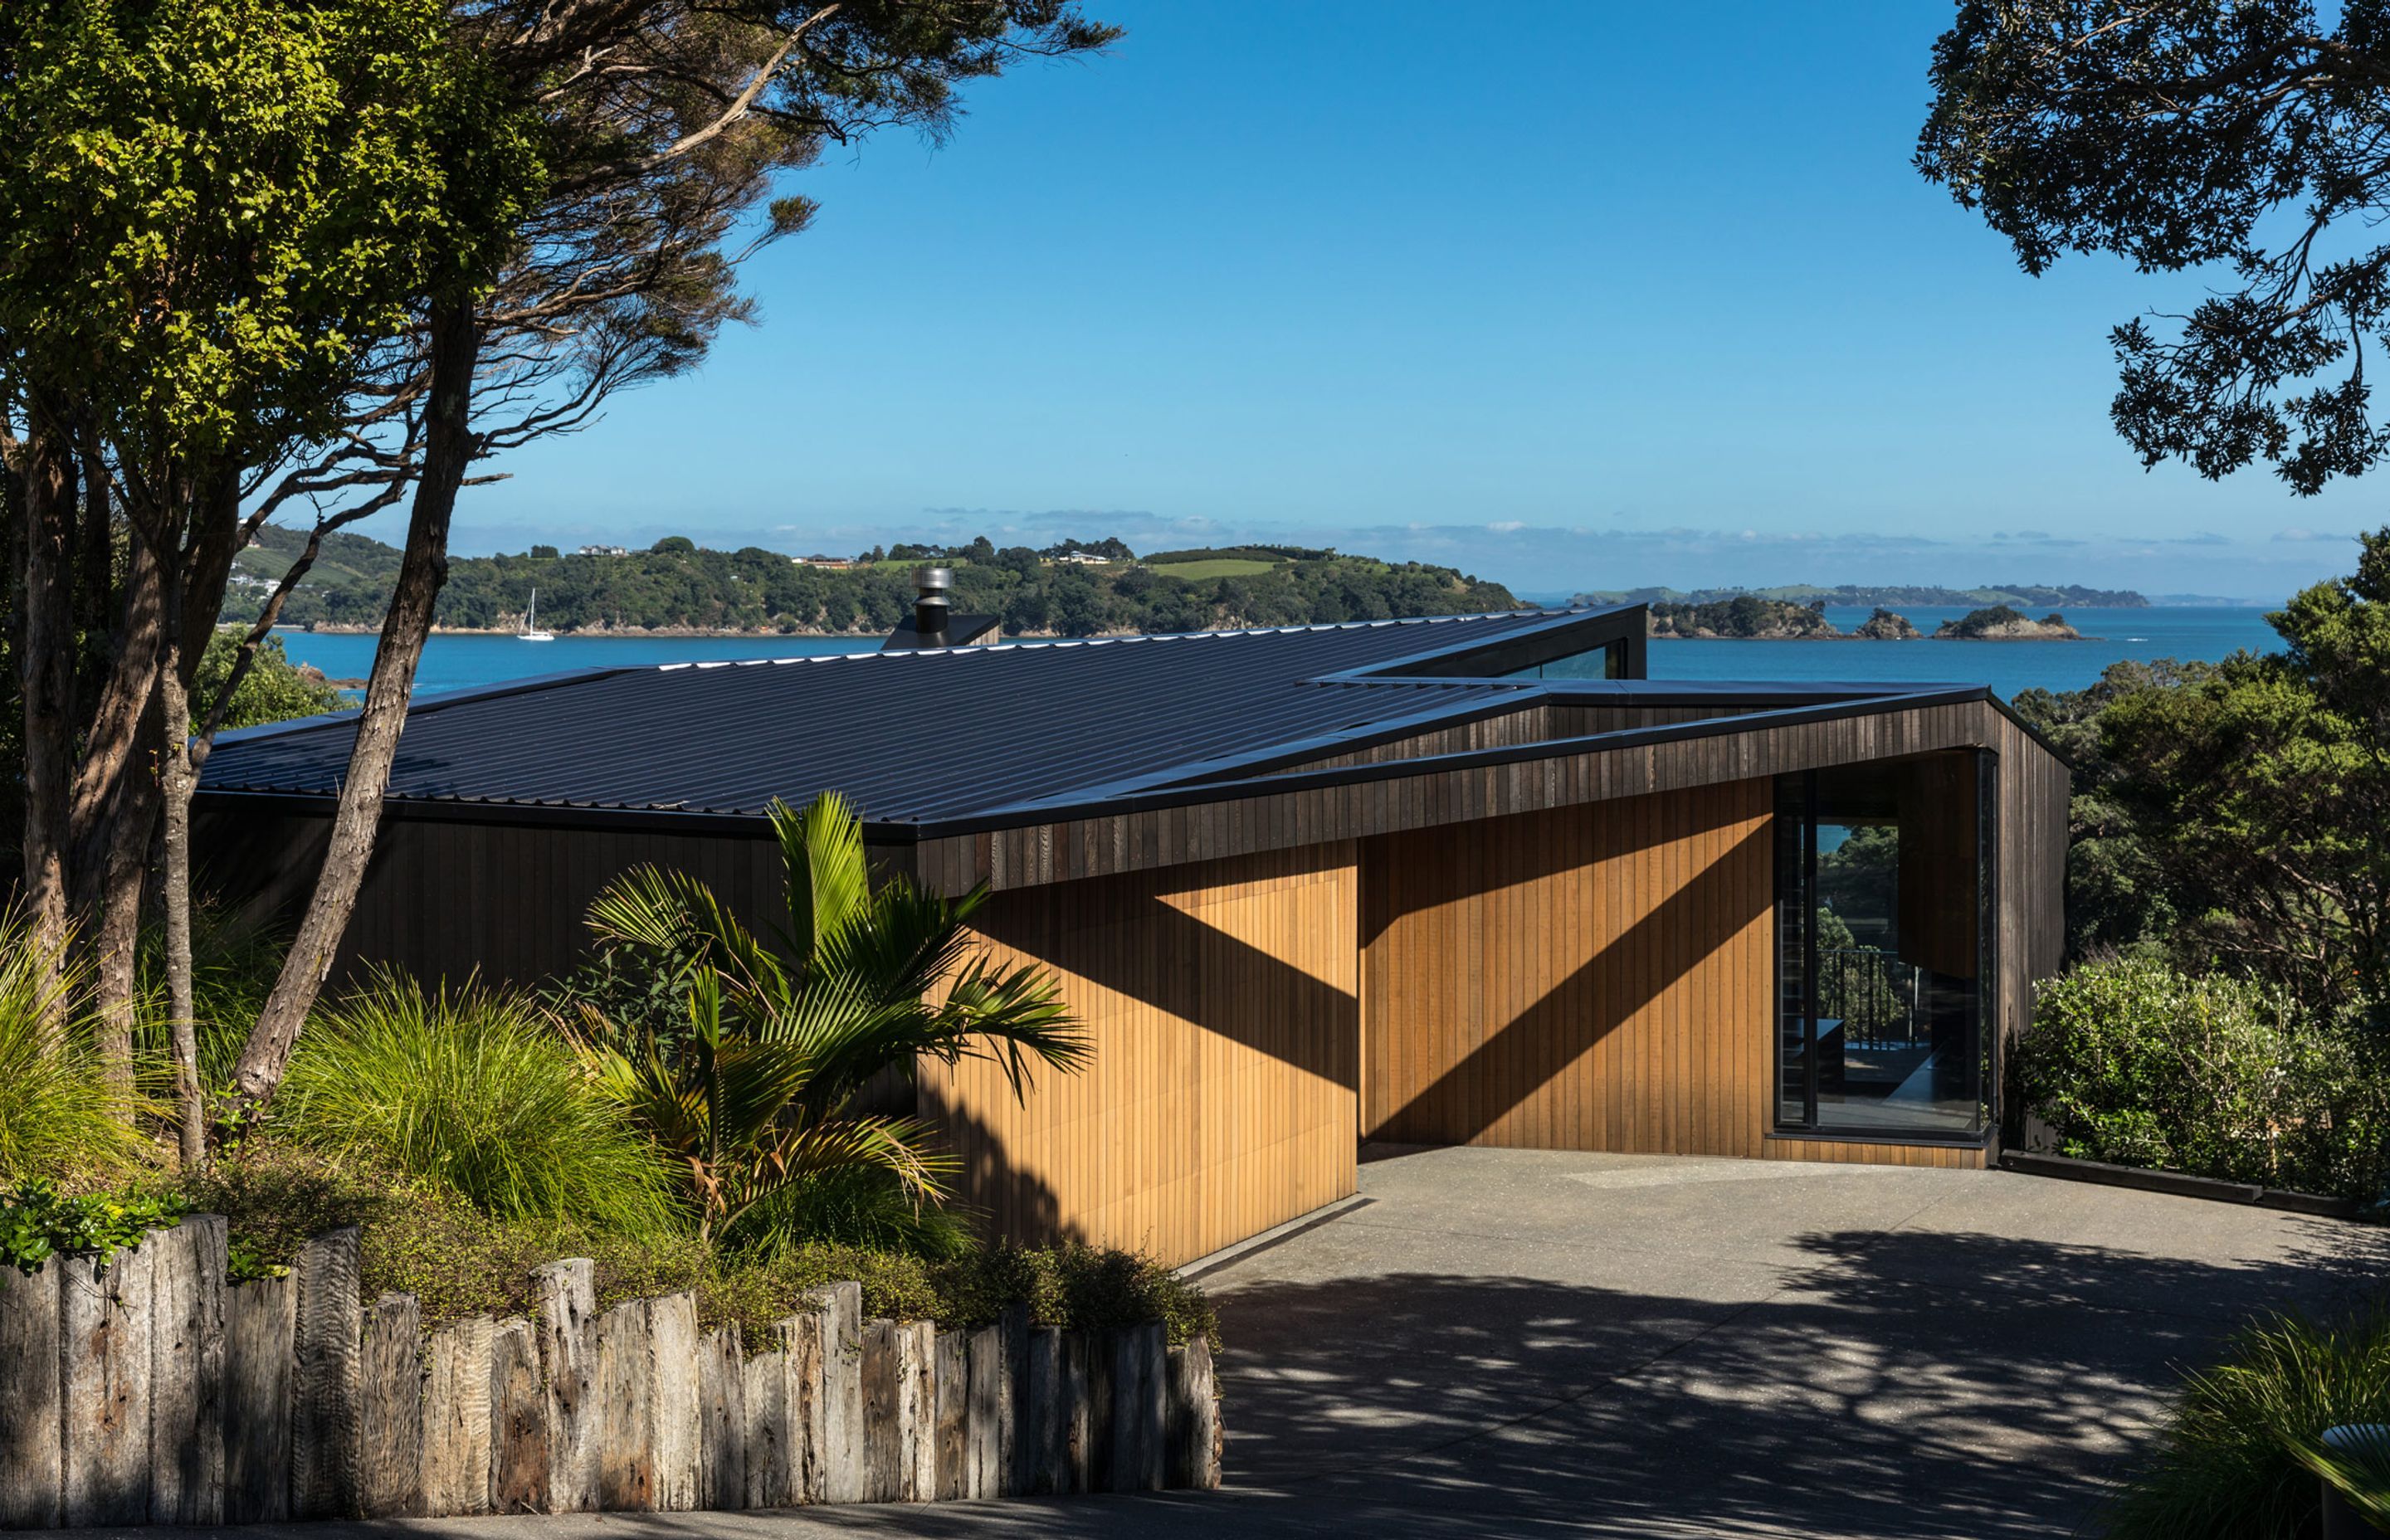 On a steep site overlooking the Hauraki Gulf, a chamfered and shadowy form settles into the landscape.